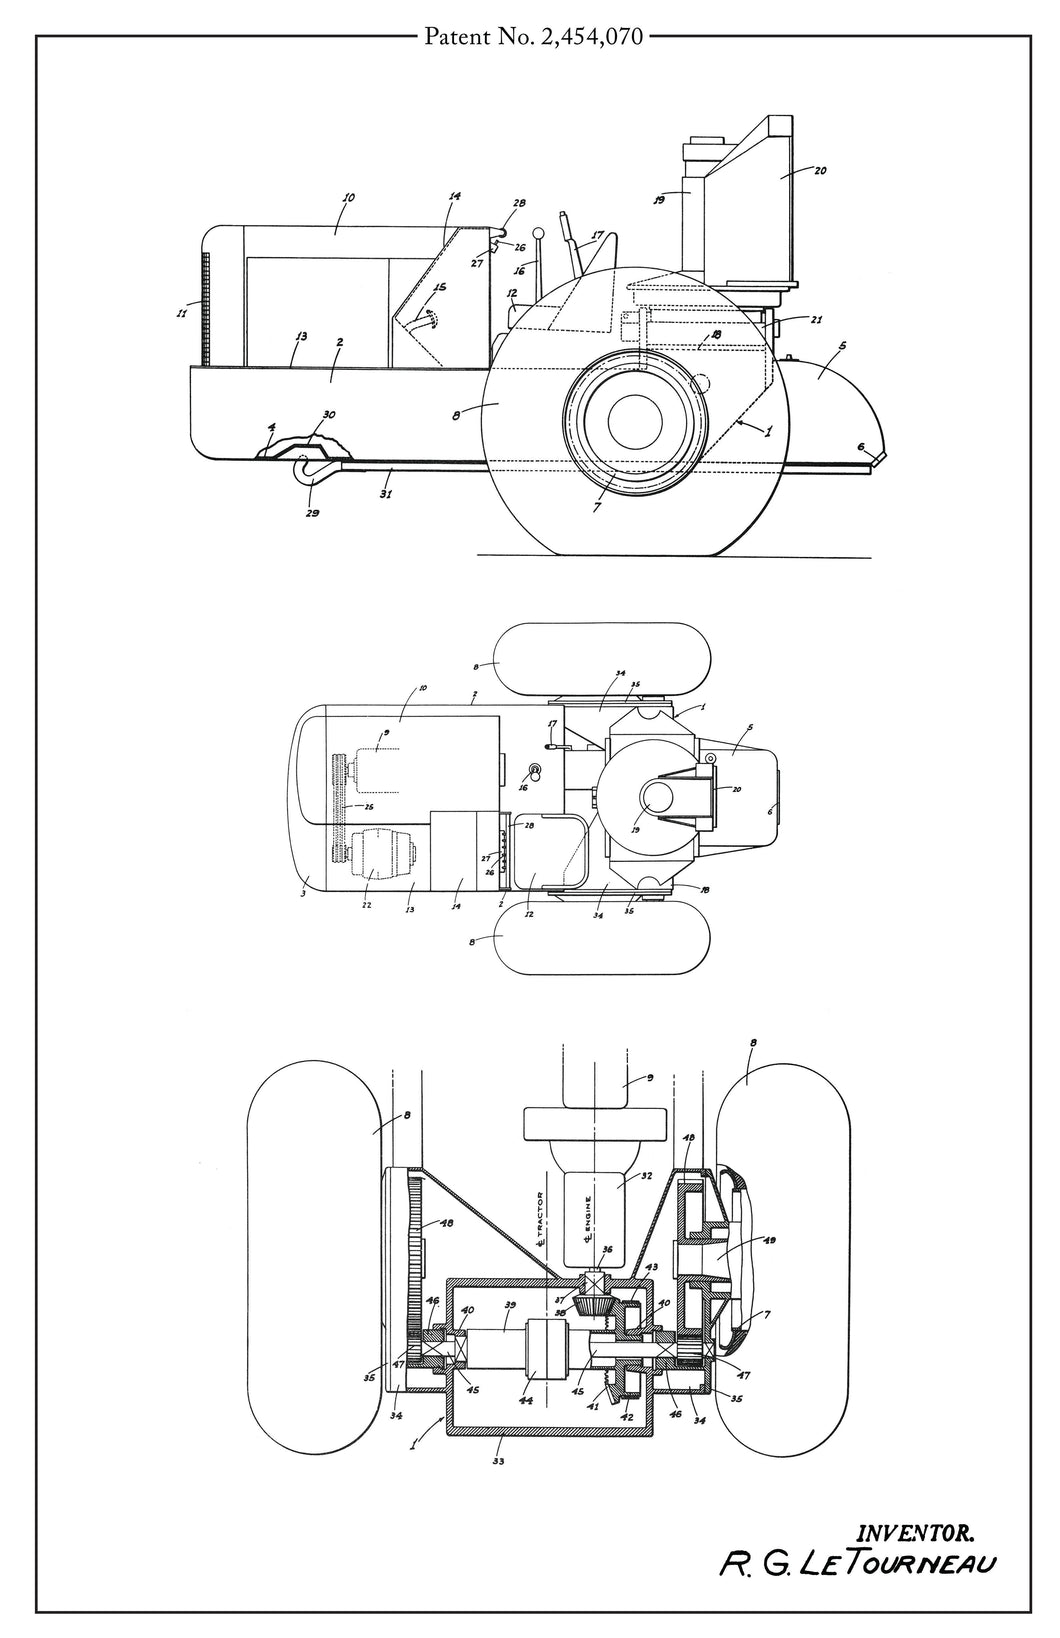 Two-wheel Tractor - Patent No. 2,454,070